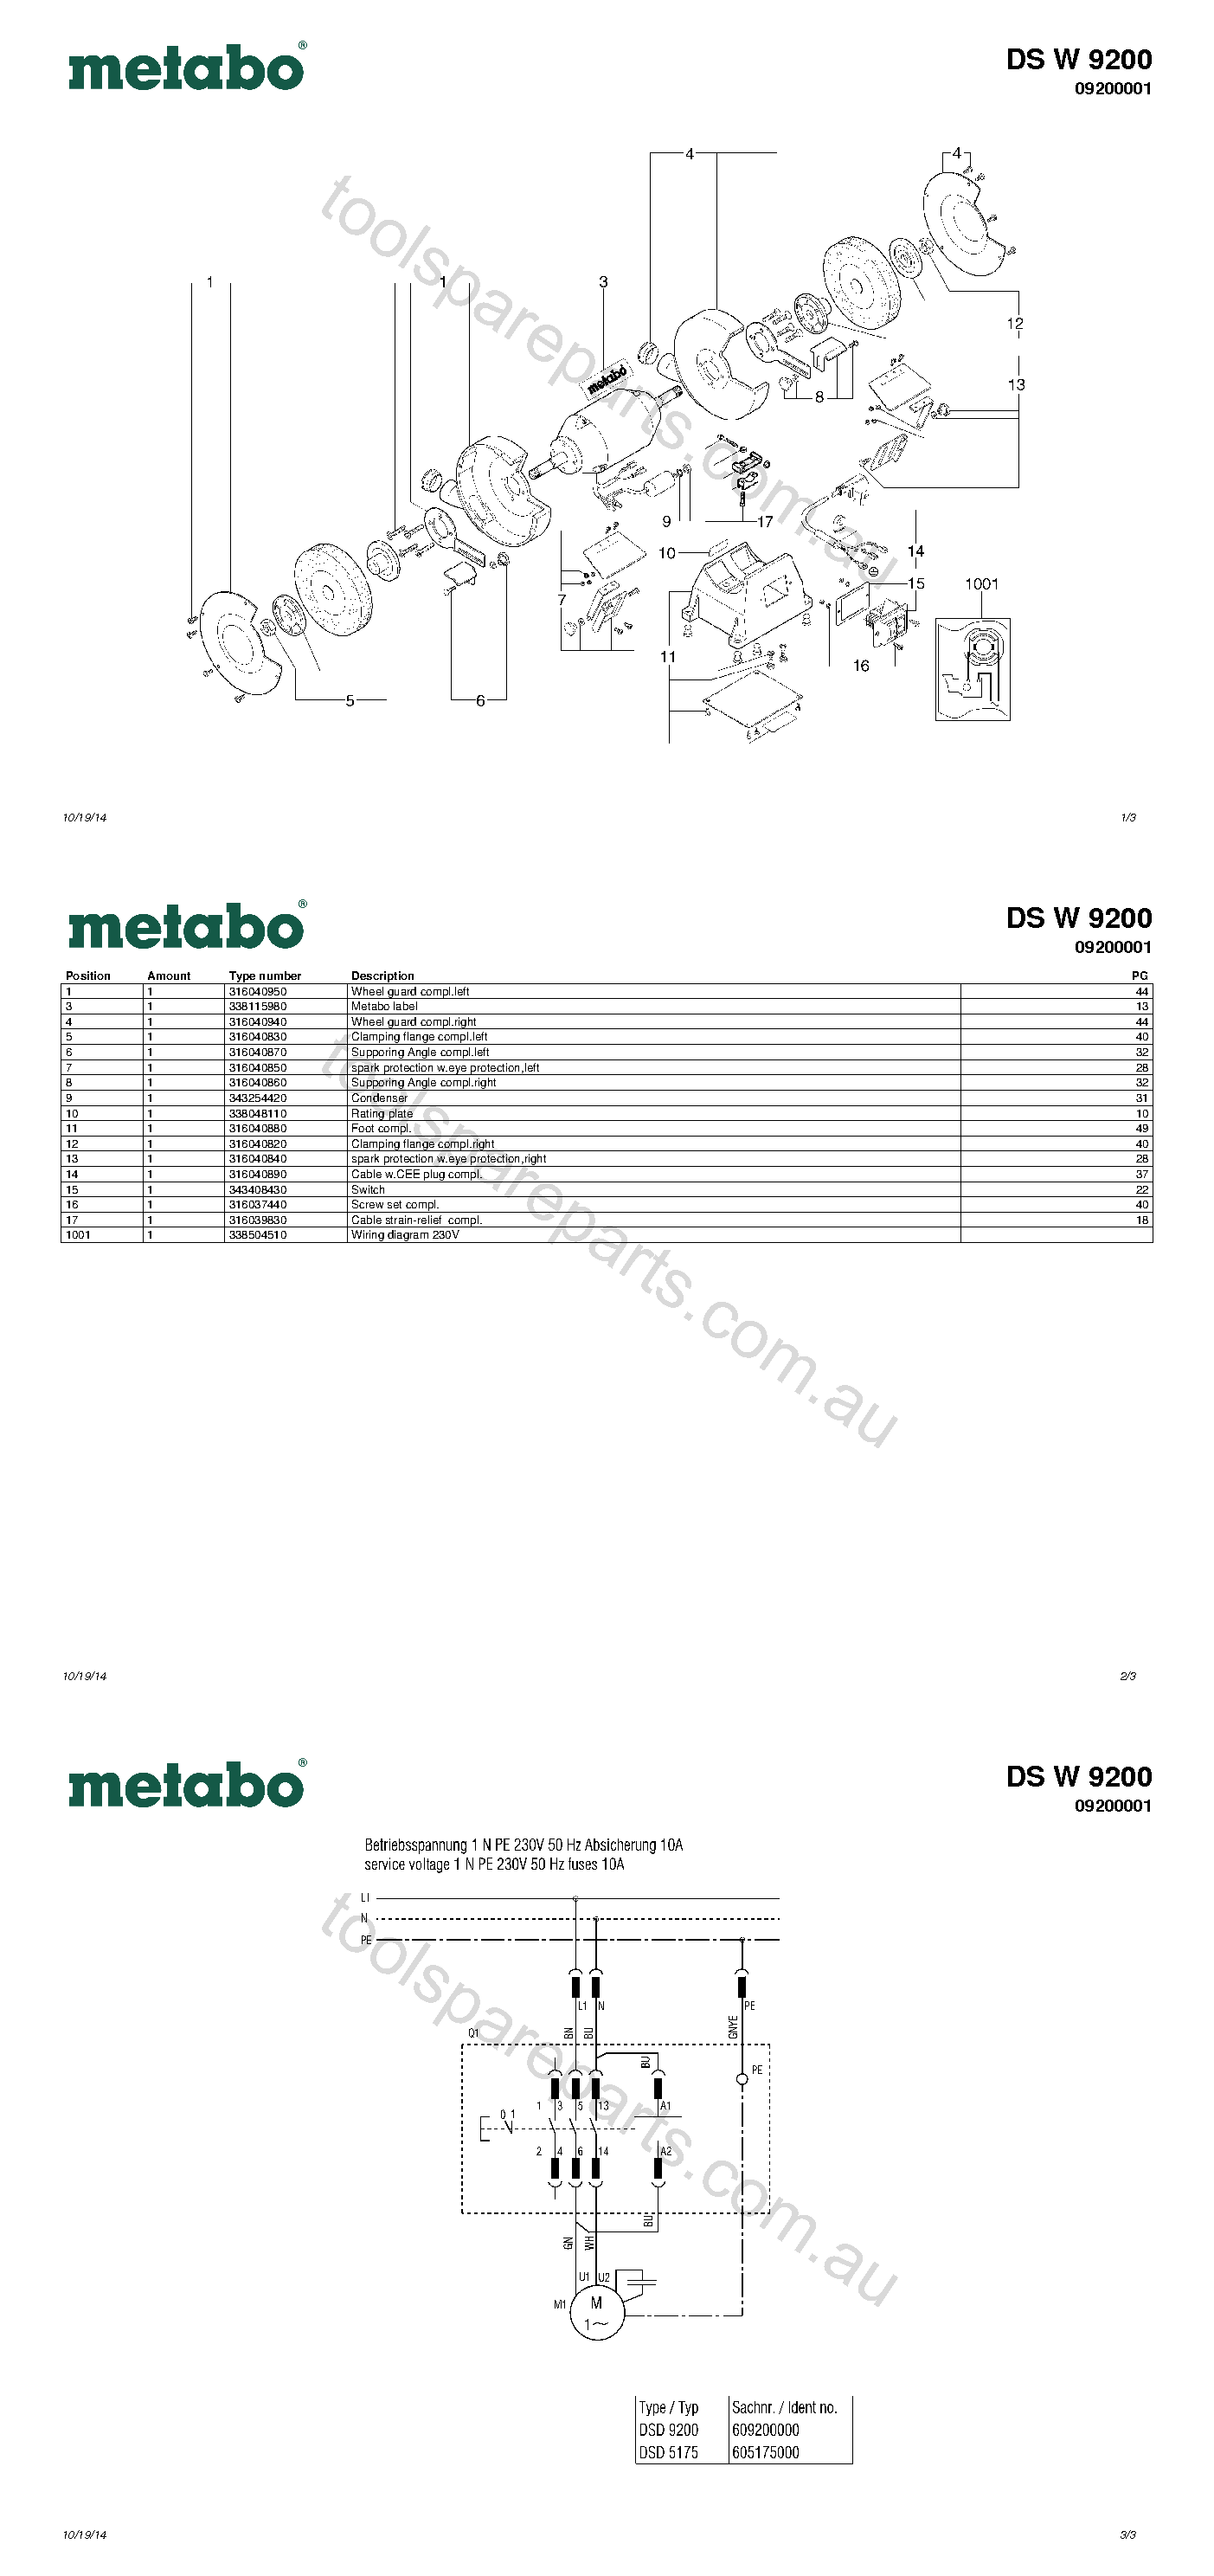 Metabo DS W 9200 09200001  Diagram 1